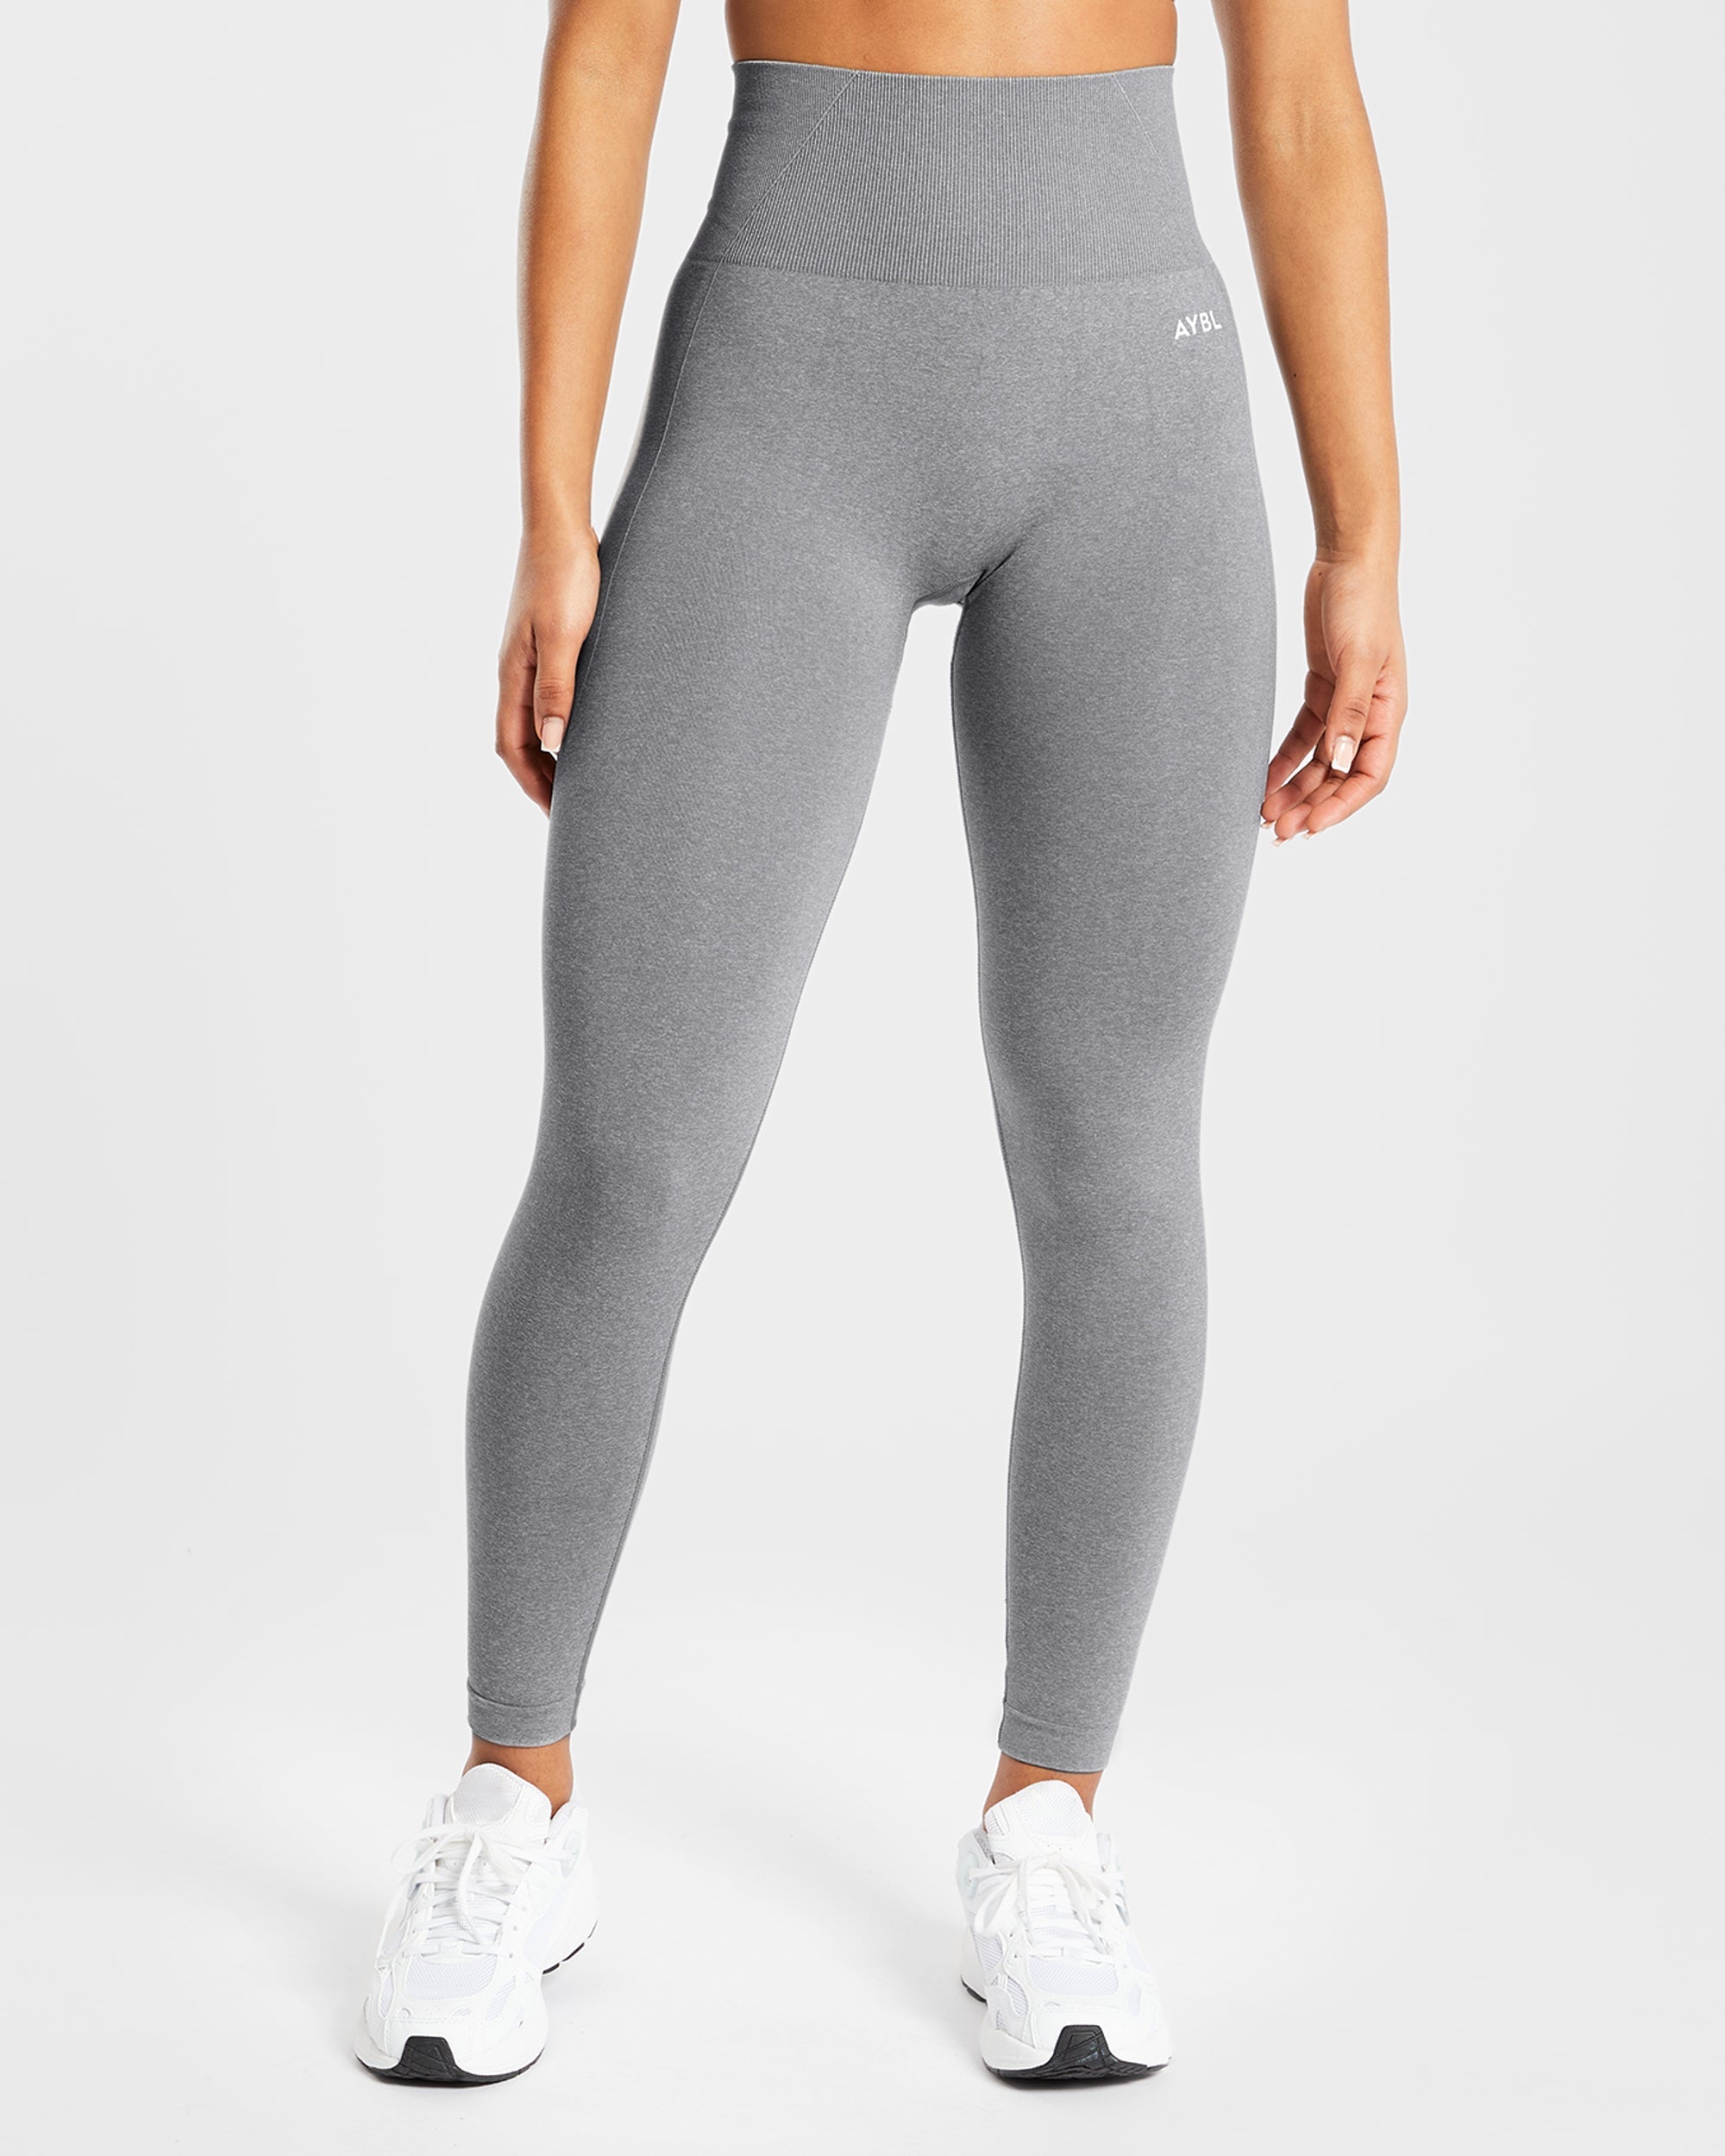 Empower Seamless Leggings - Taupe Marl – AYBL size S